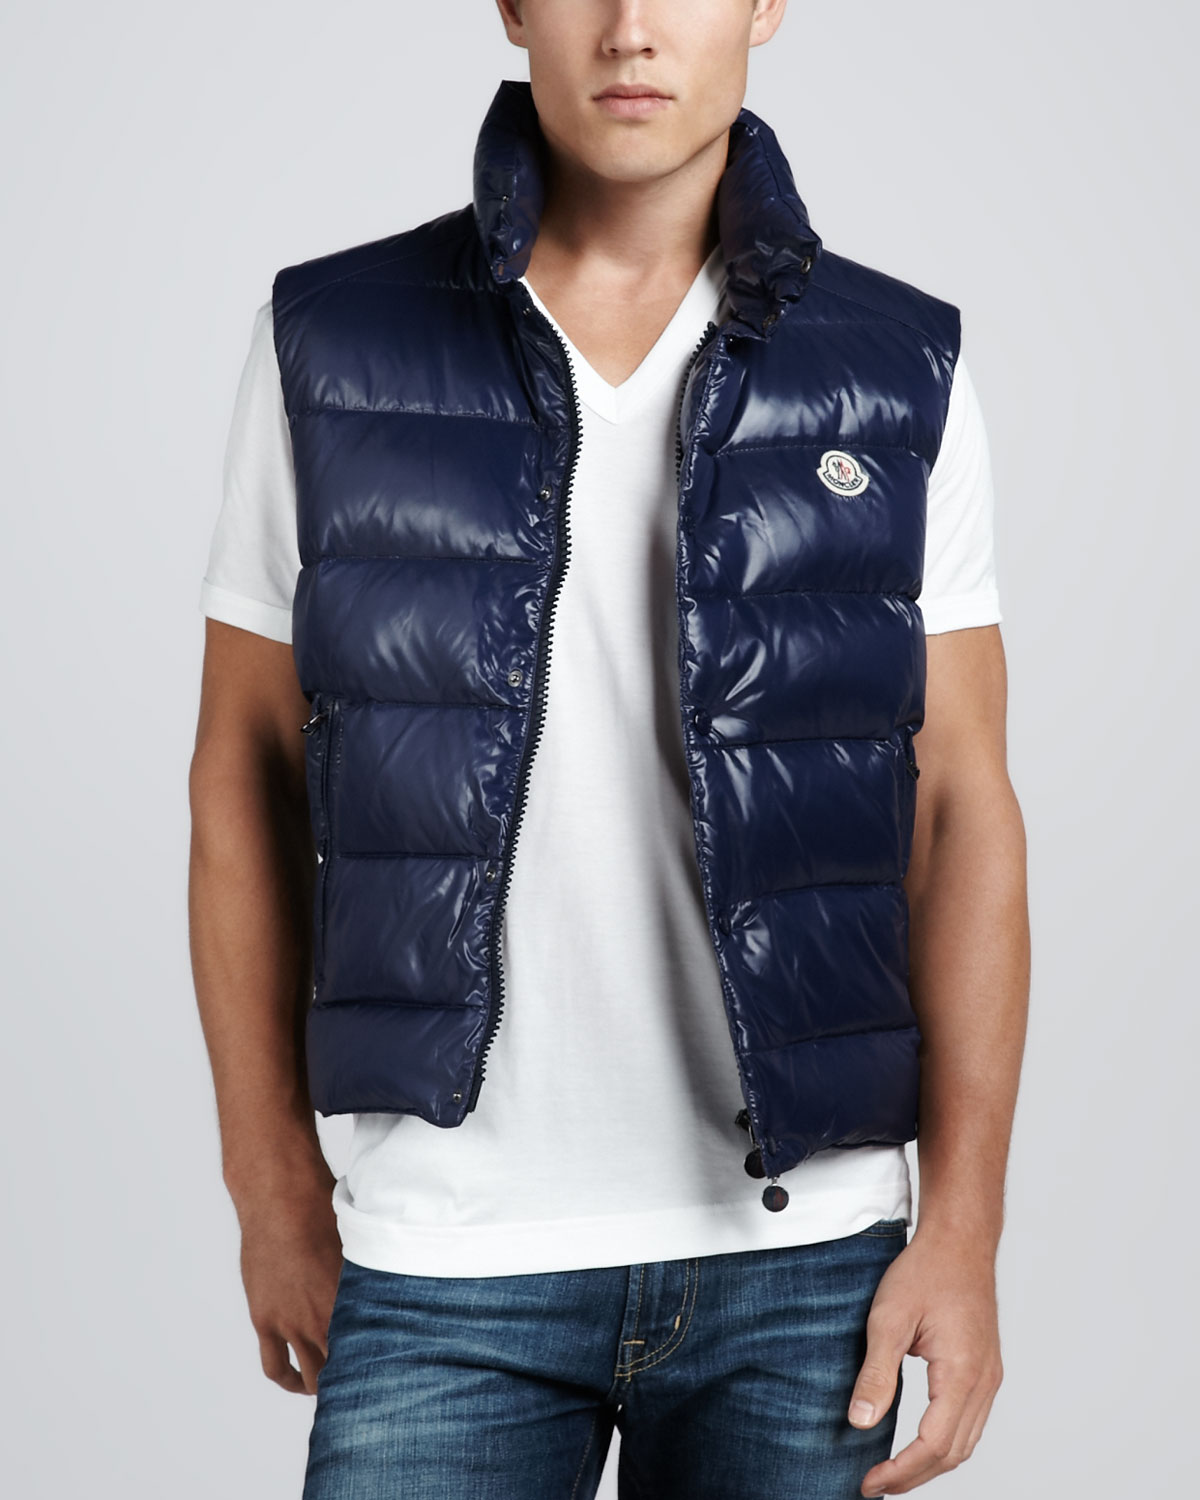 Purchase > moncler men's vests, Up to 61% OFF